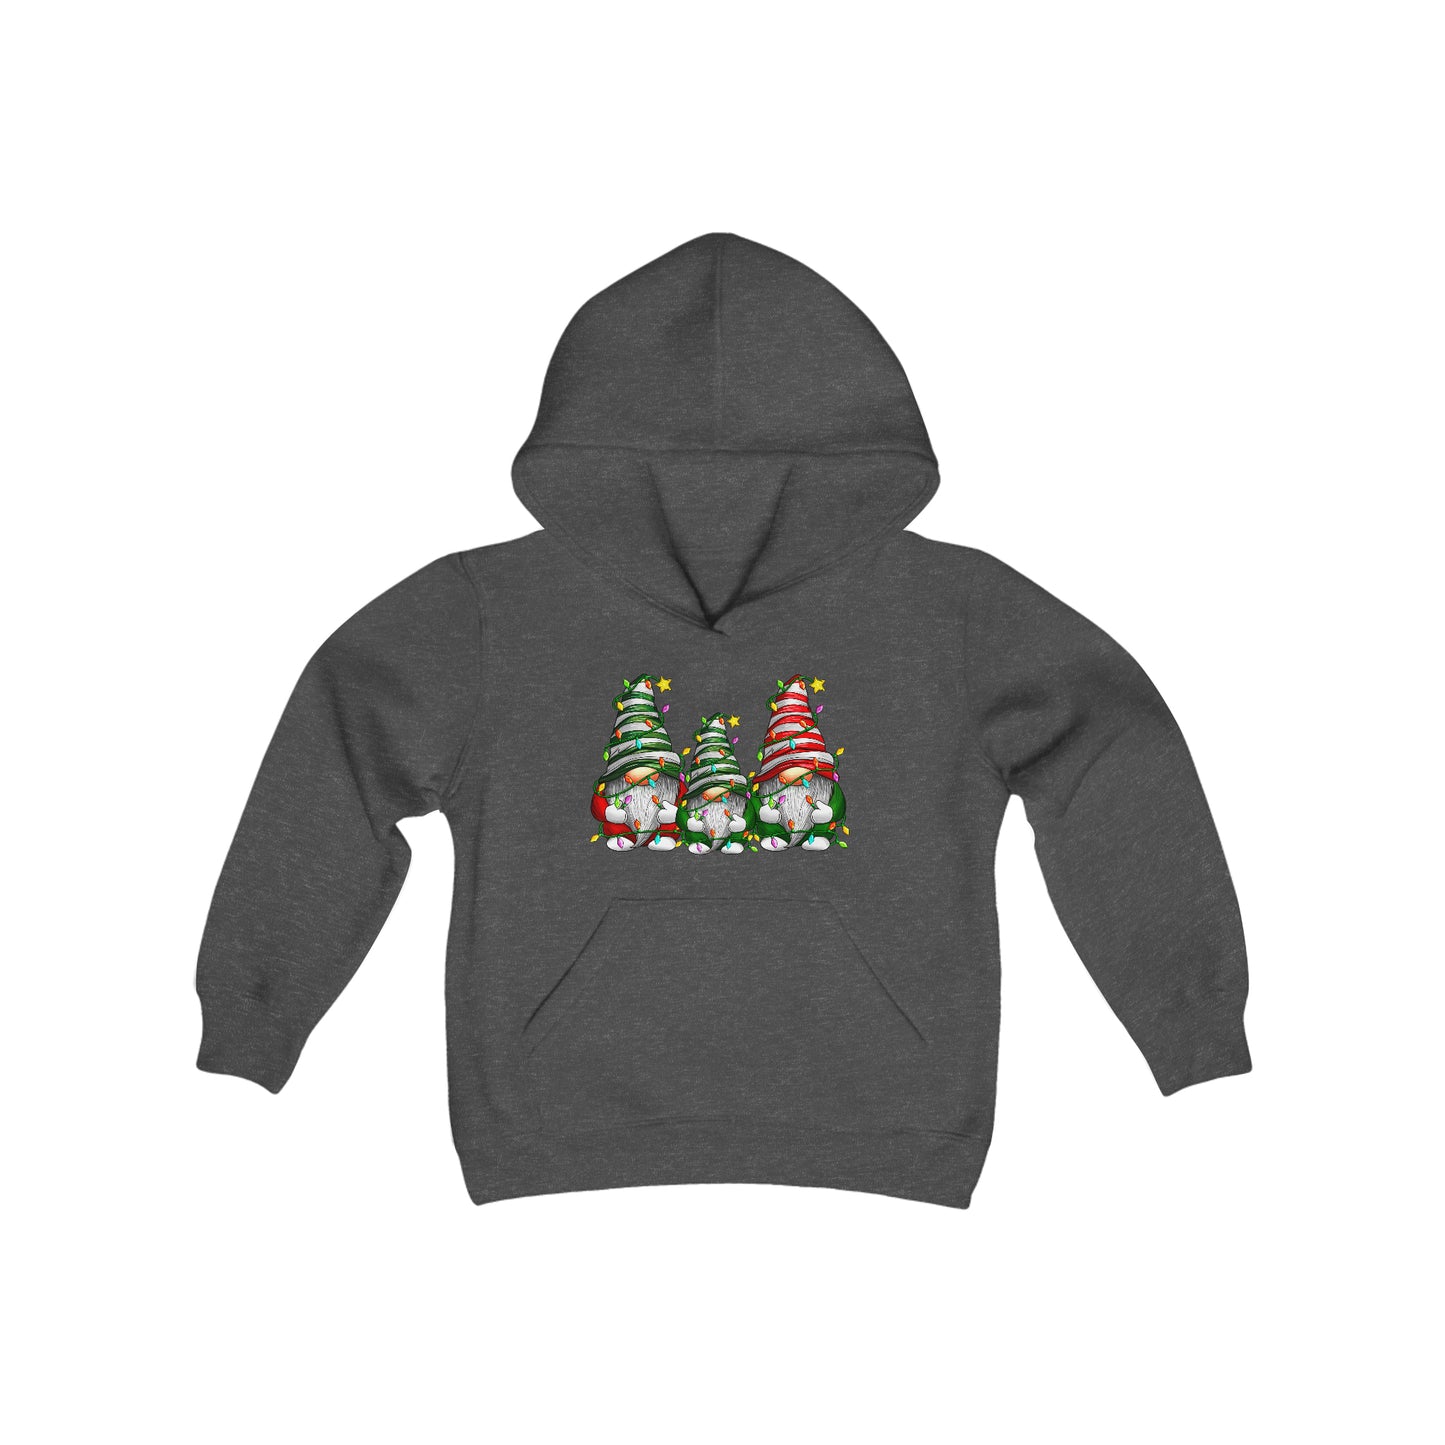 Christmas Gnome Family - Christmas Lights - Funny Christmas - Fun Winter - Cute Winter Words - Youth Heavy Blend Hooded Sweatshirt